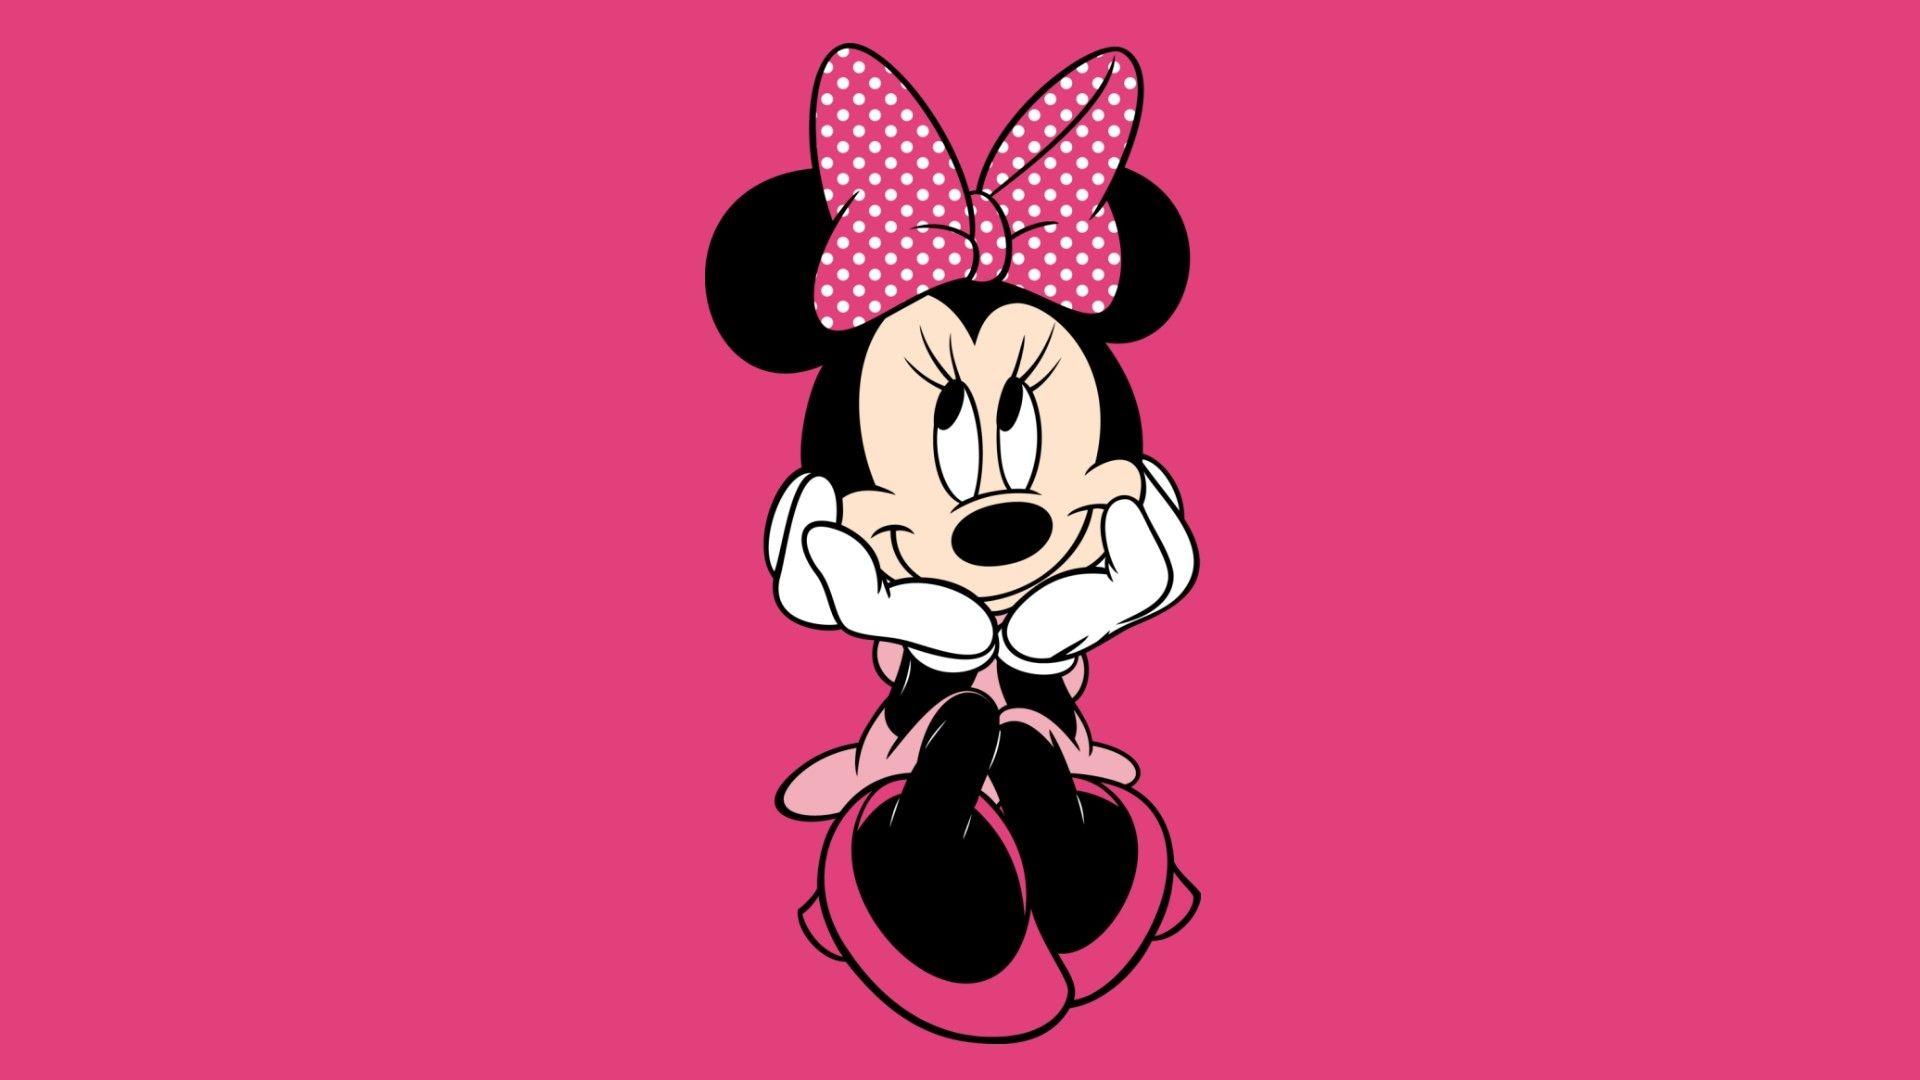 Minnie Mouse Wallpaper Download HD Minnie Mouse Wallpaper For